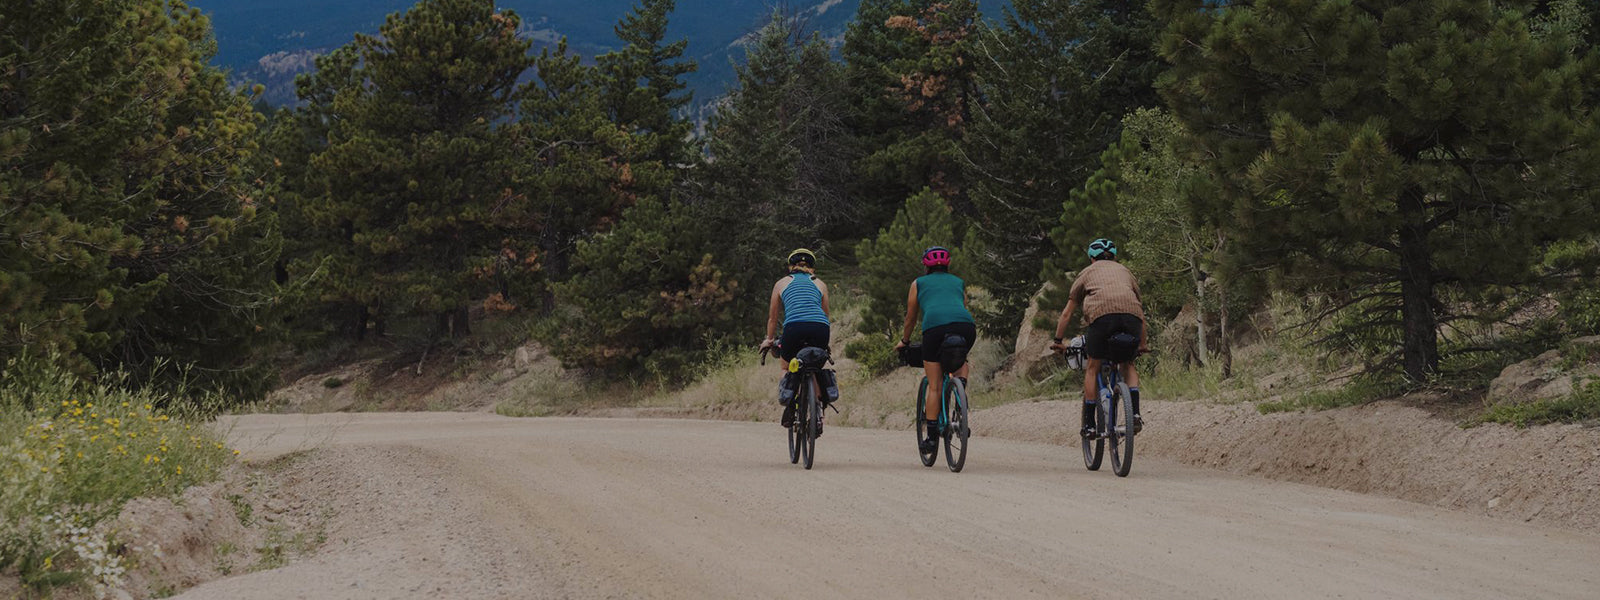 Three people cycling down dirt road